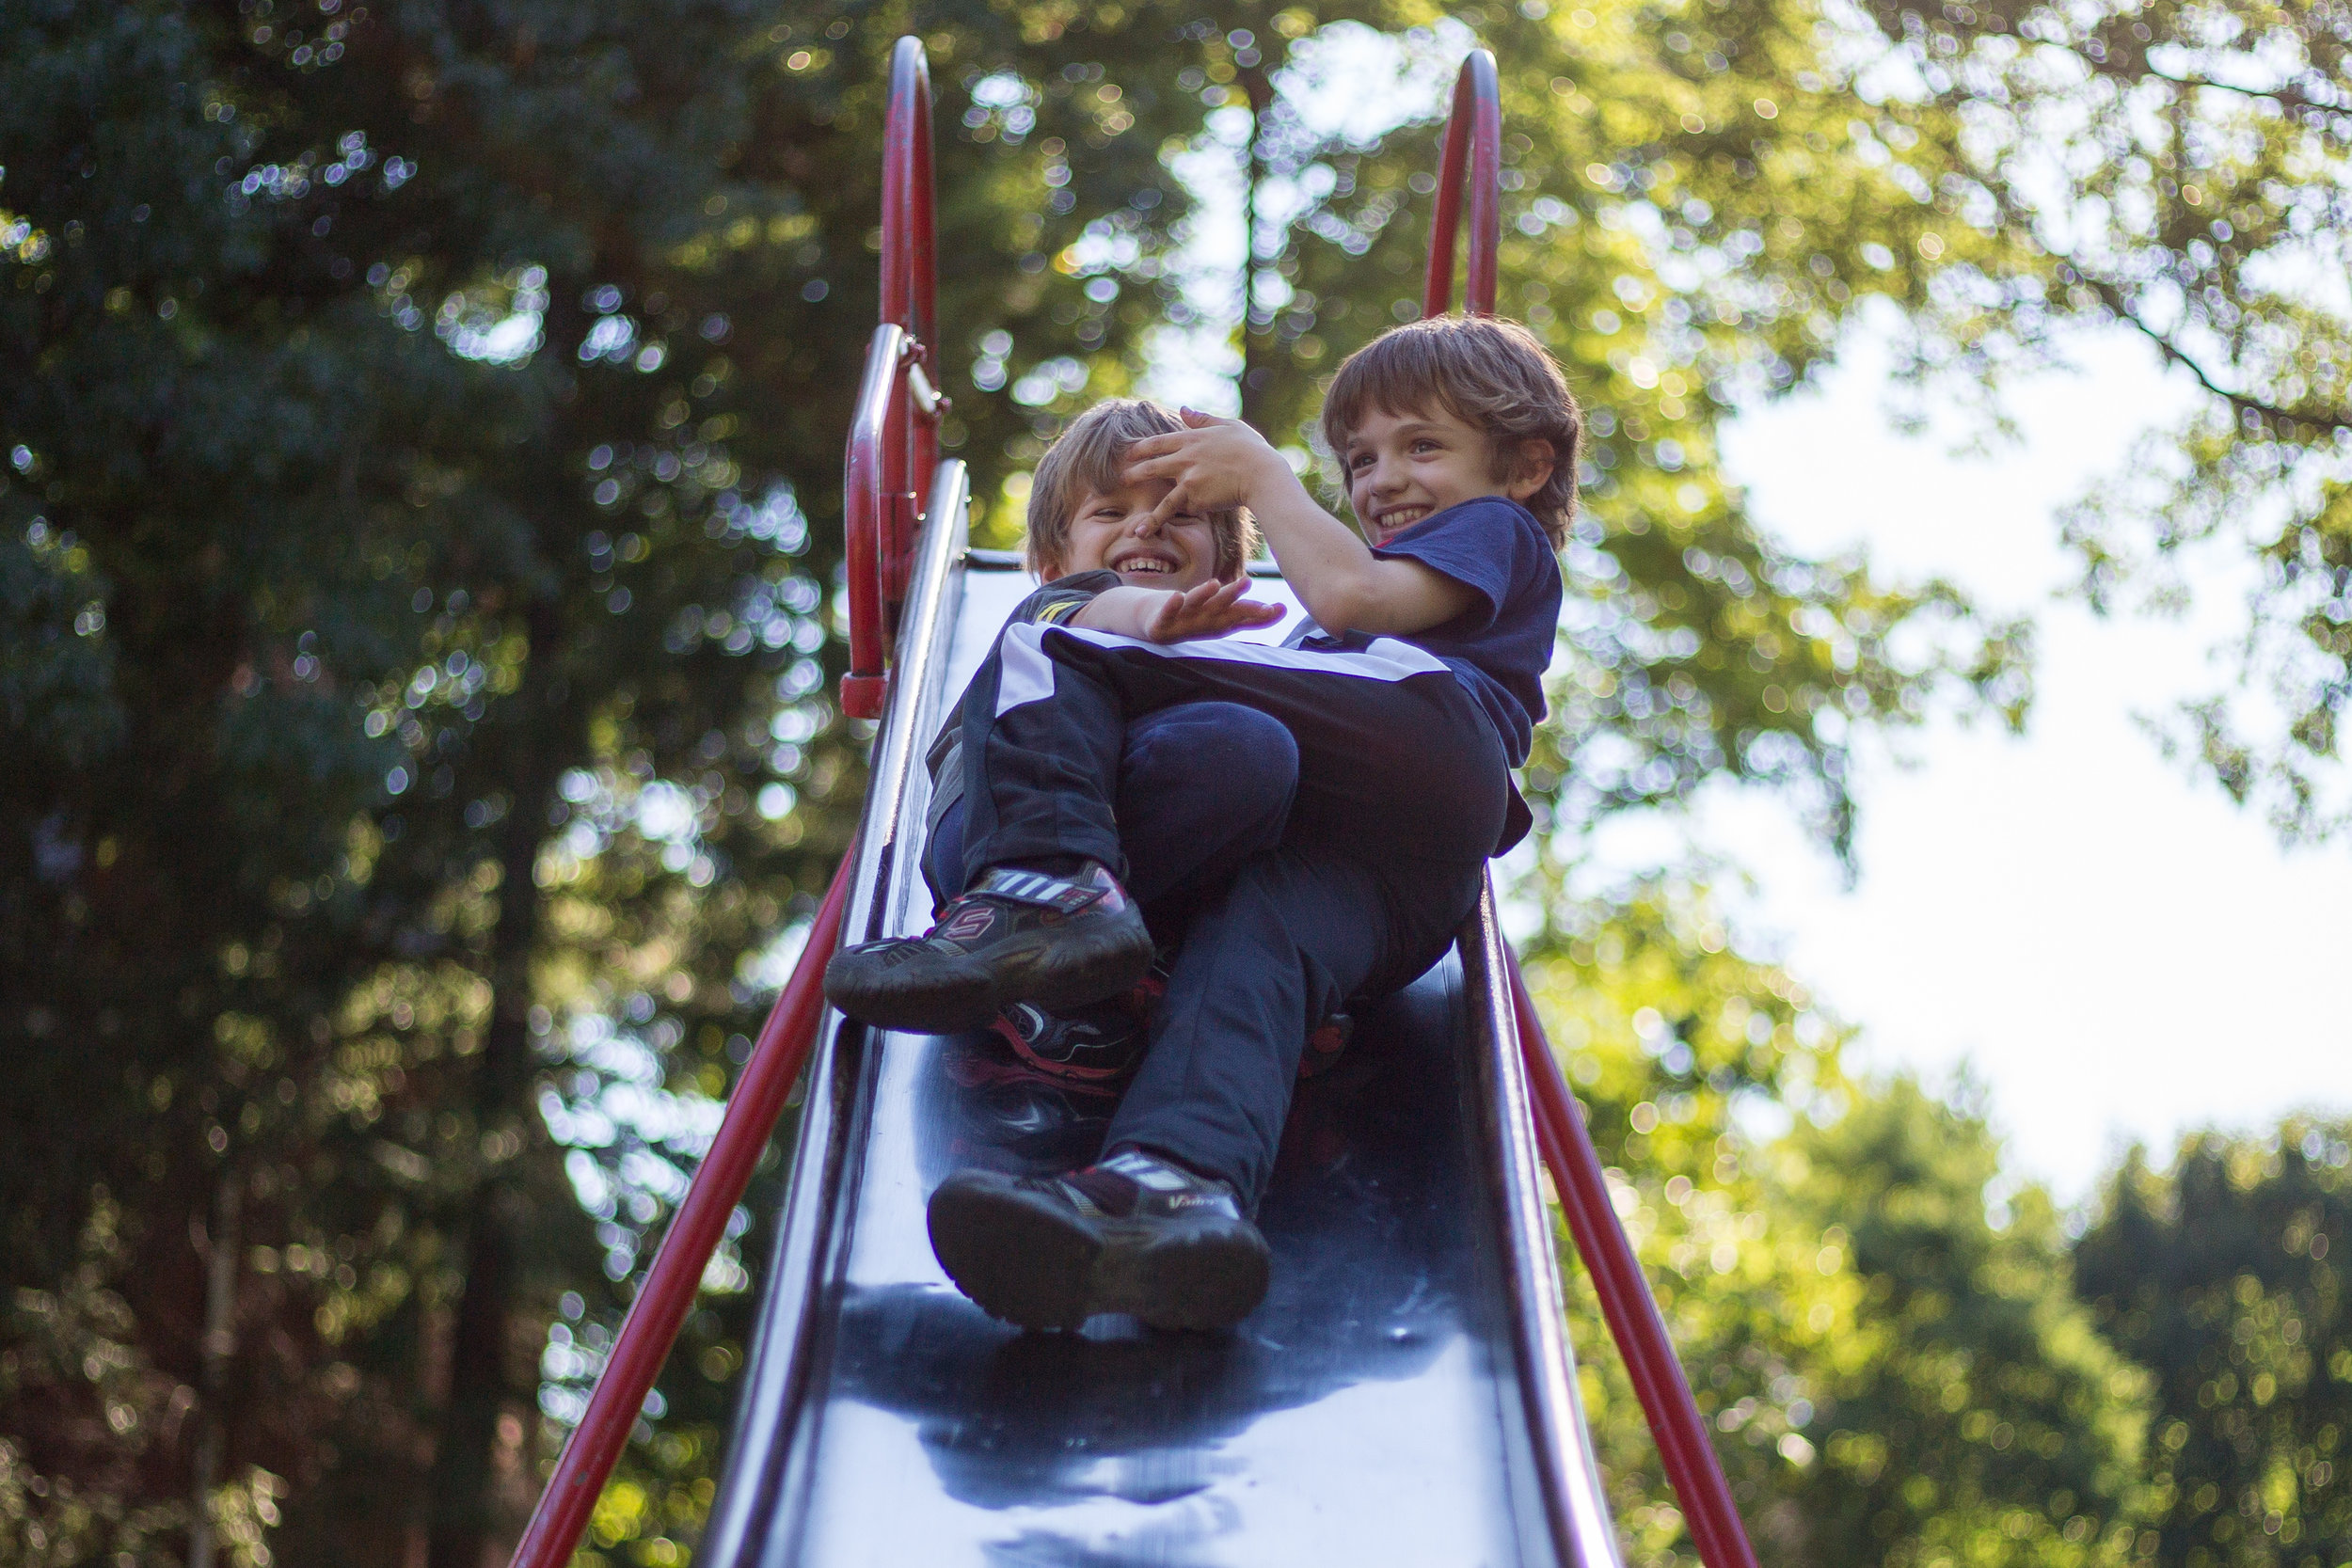  Gabriel Martella, 4, left and older brother Domynik, 8, play on the slide at Wayne Park in Beaver on Monday afternoon.  